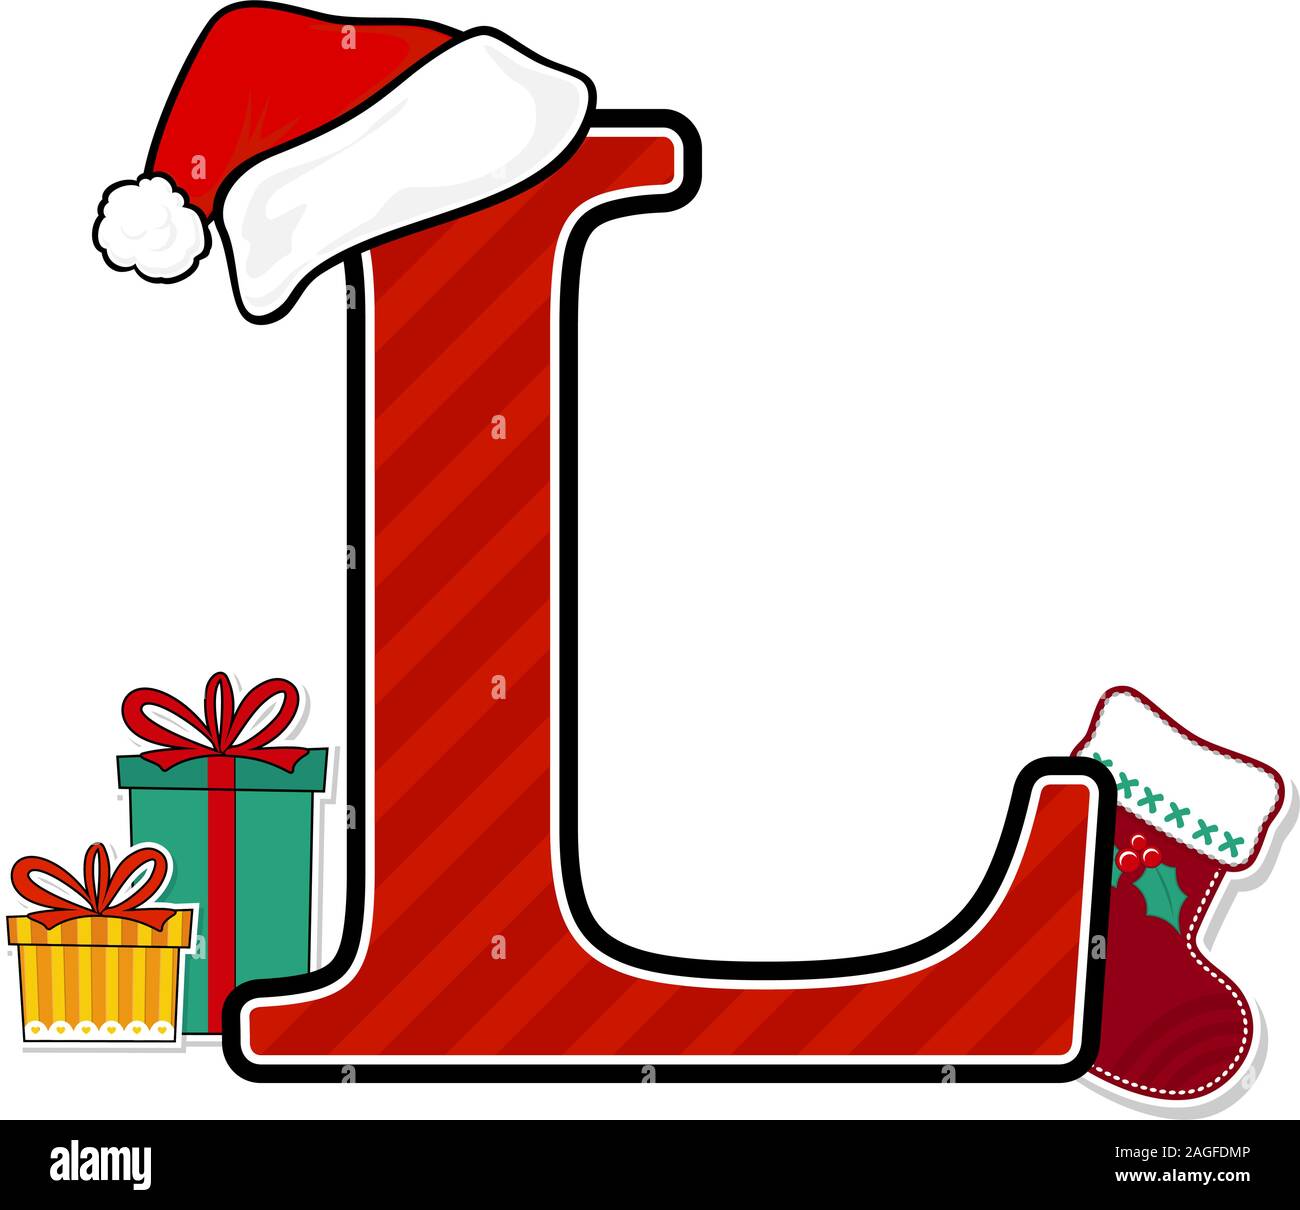 capital letter l with red santa's hat and christmas design elements isolated on white background. can be used for holiday season card, nursery decorat Stock Vector